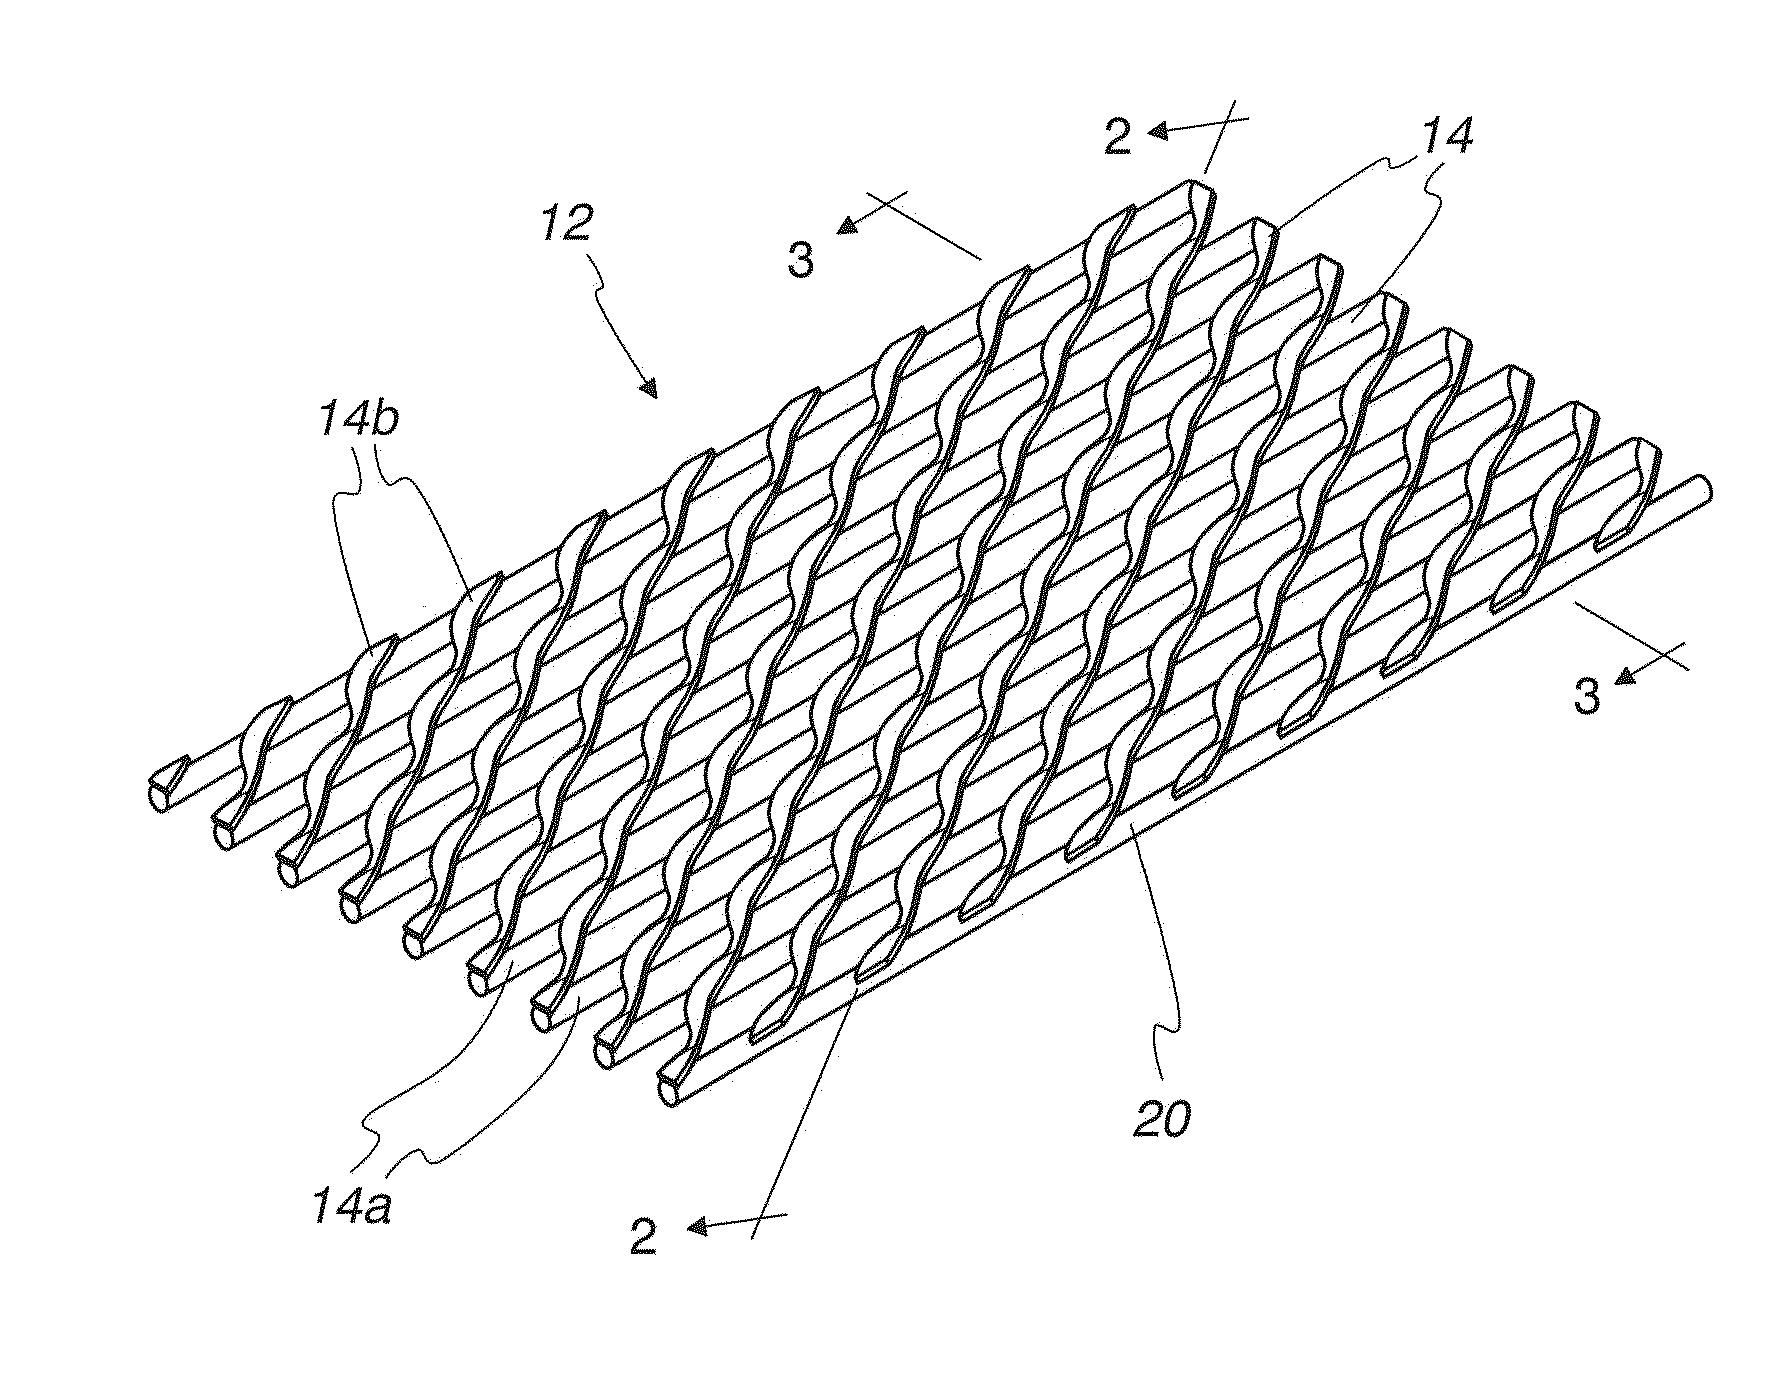 Geonet for a geocomposite